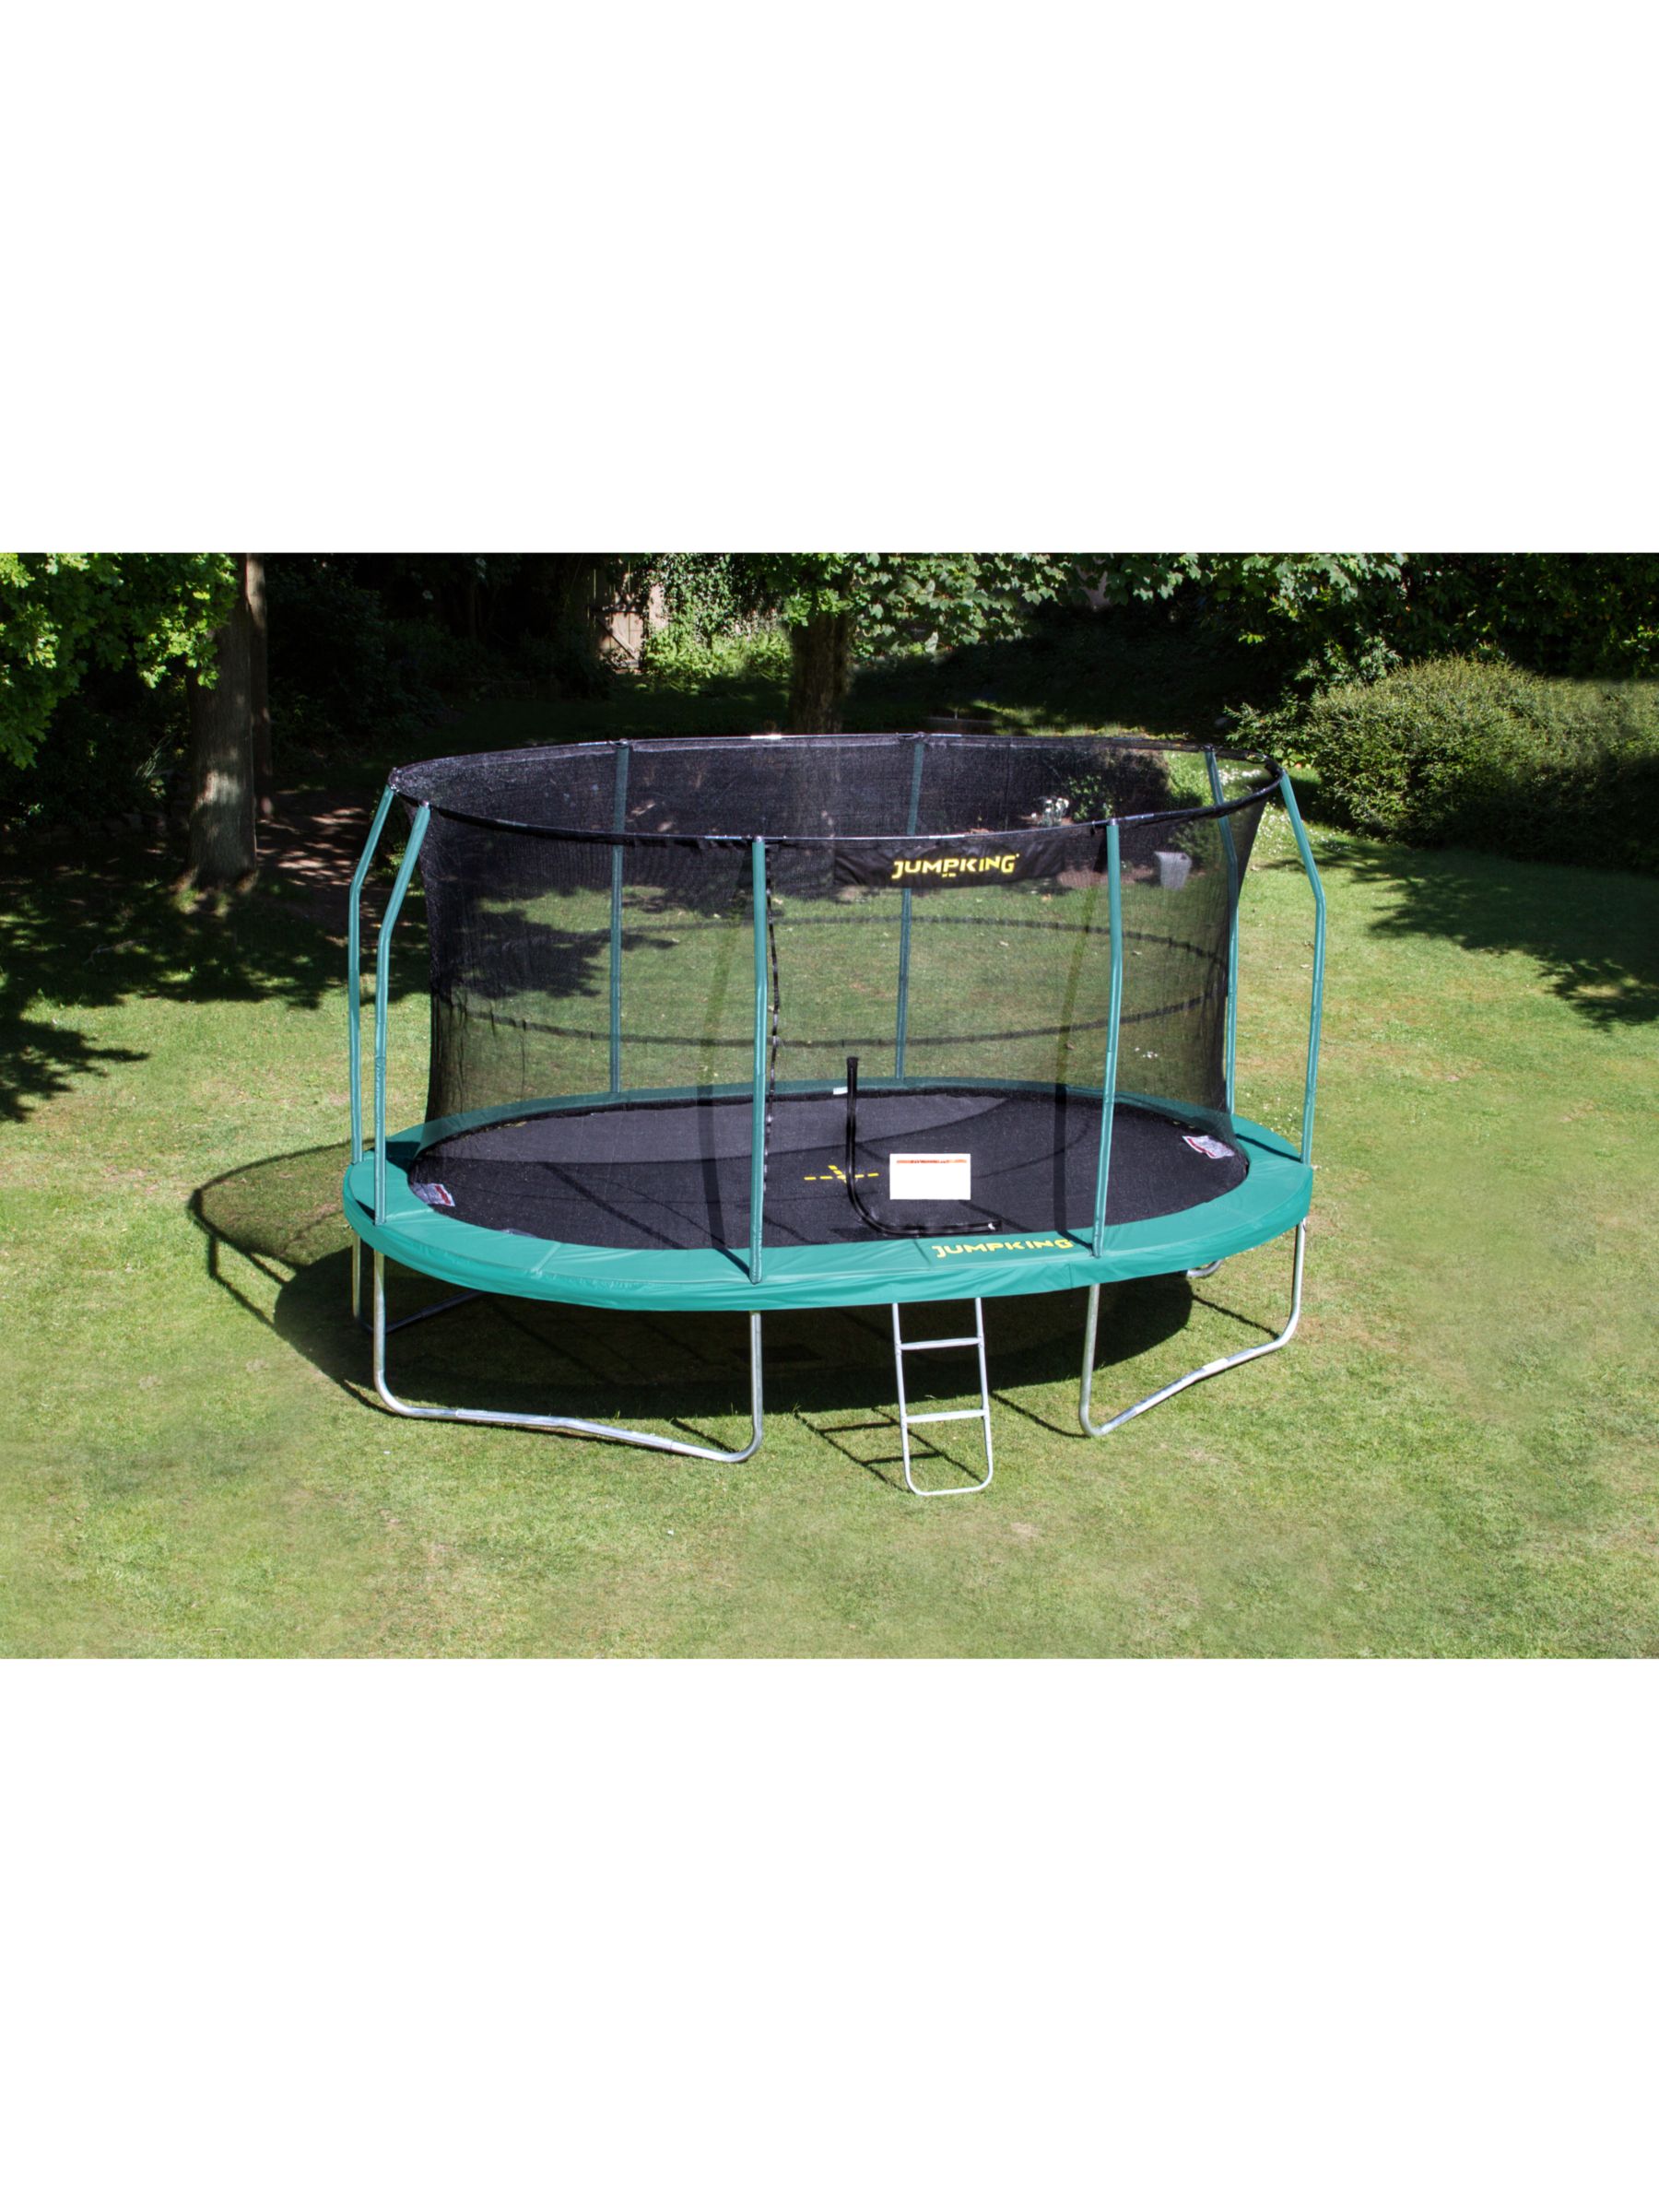 JumpKing 8 x 11.5ft Oval Trampoline at John Lewis & Partners